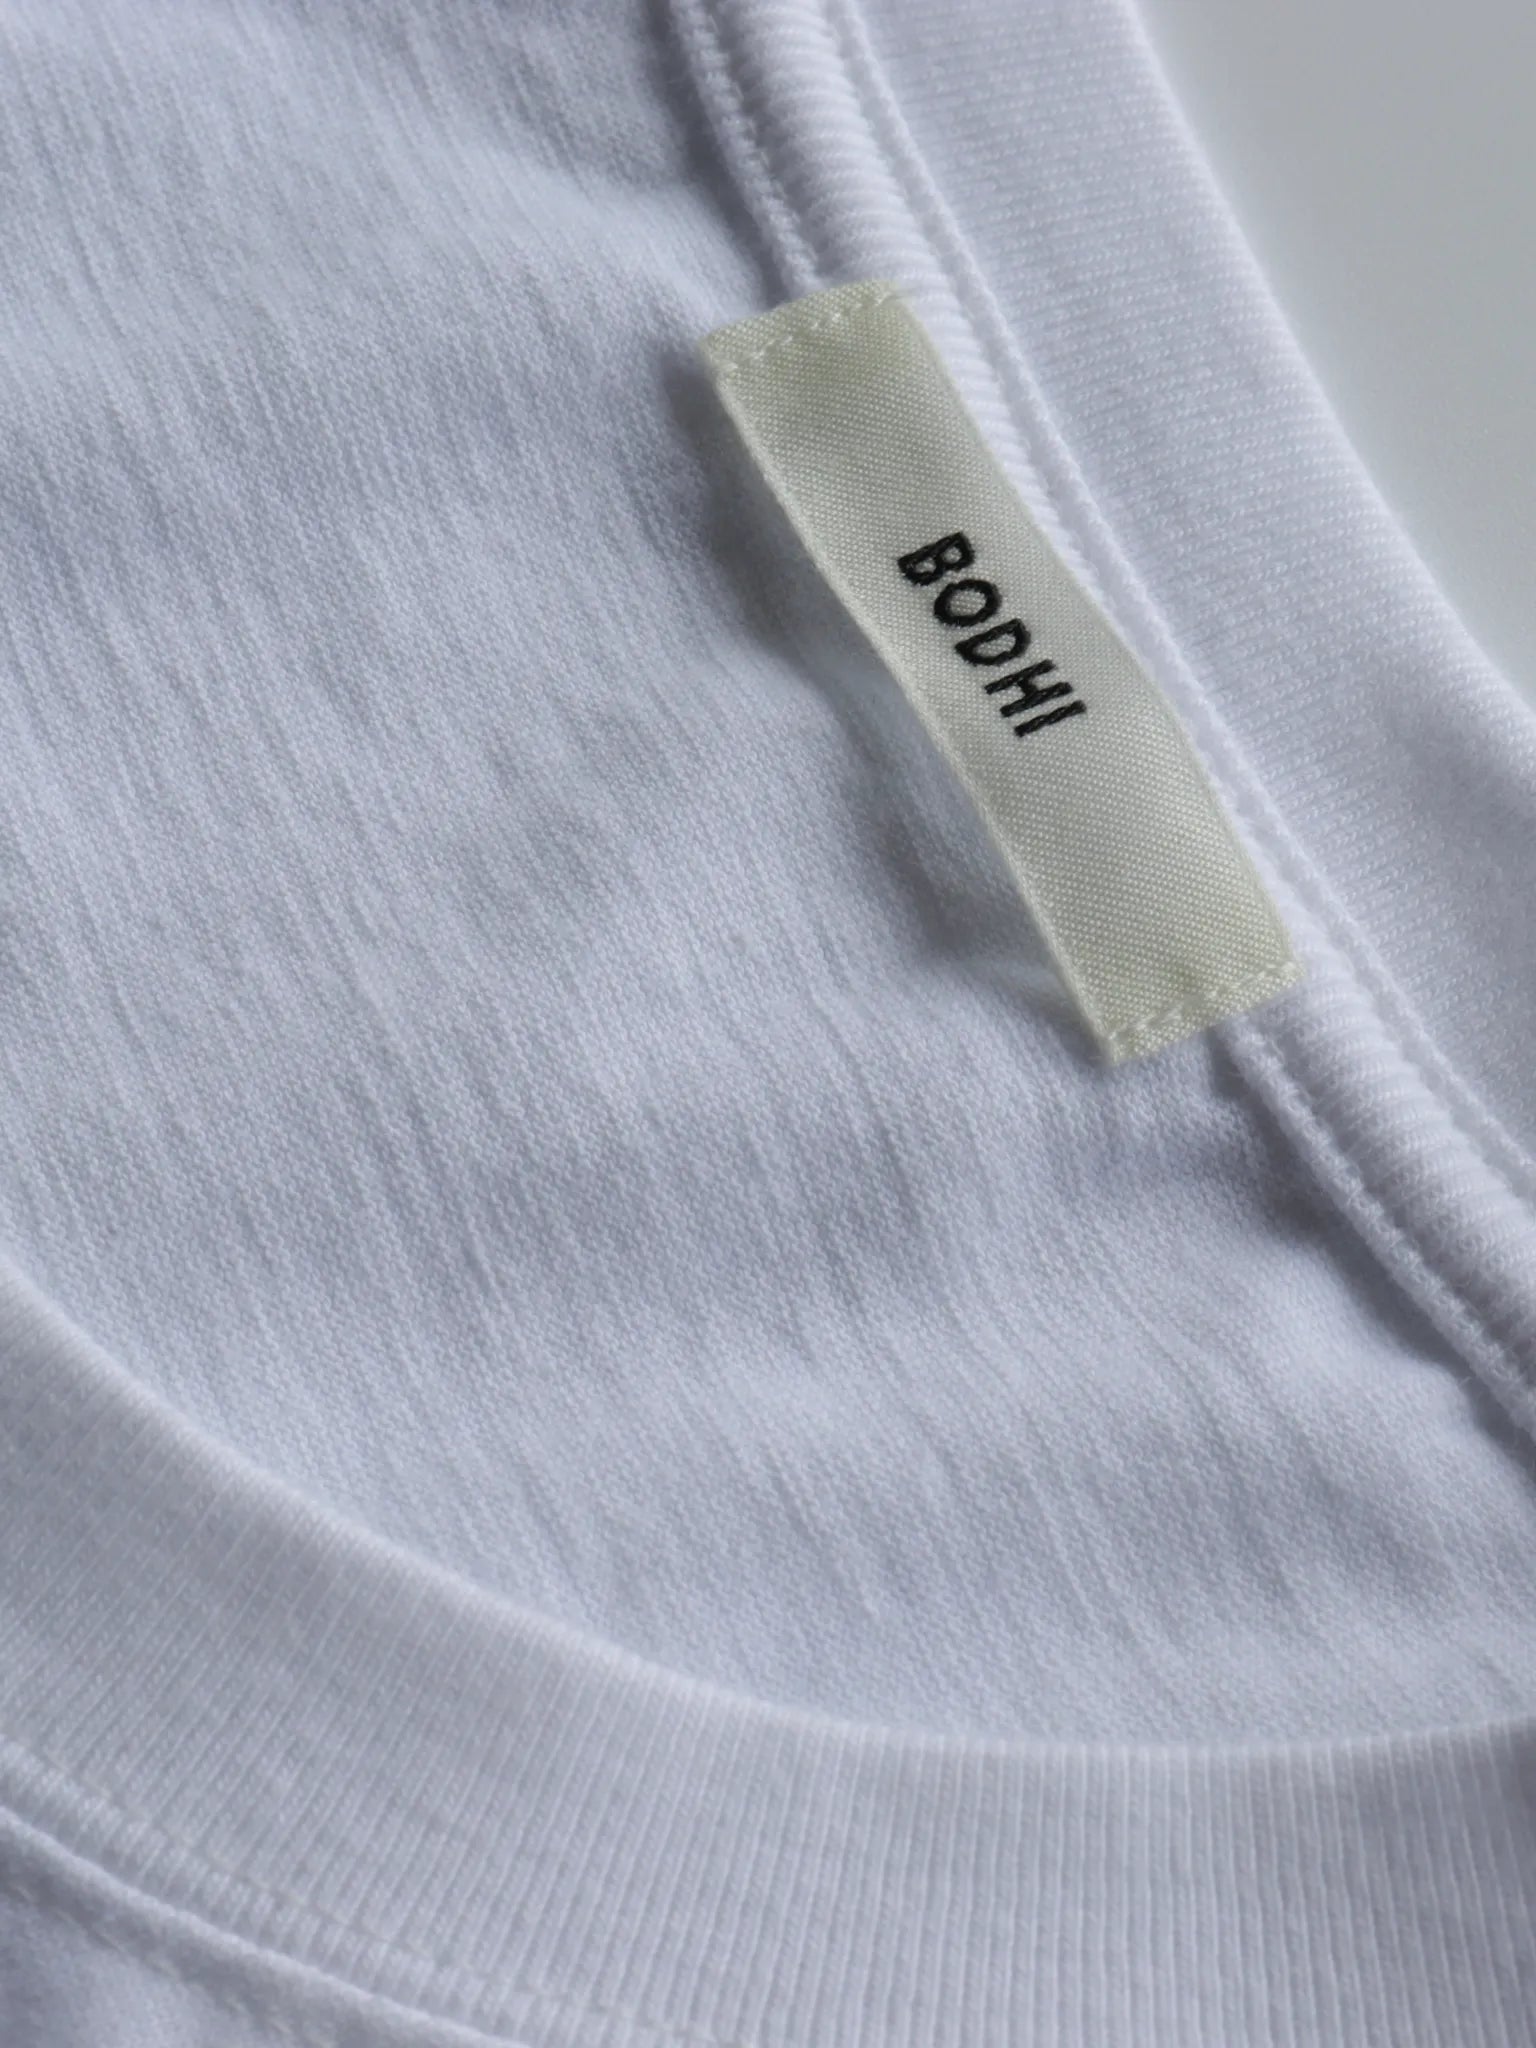 bodhi-middleweight-cotton-cashmere-long-sleeve-tee-white-3